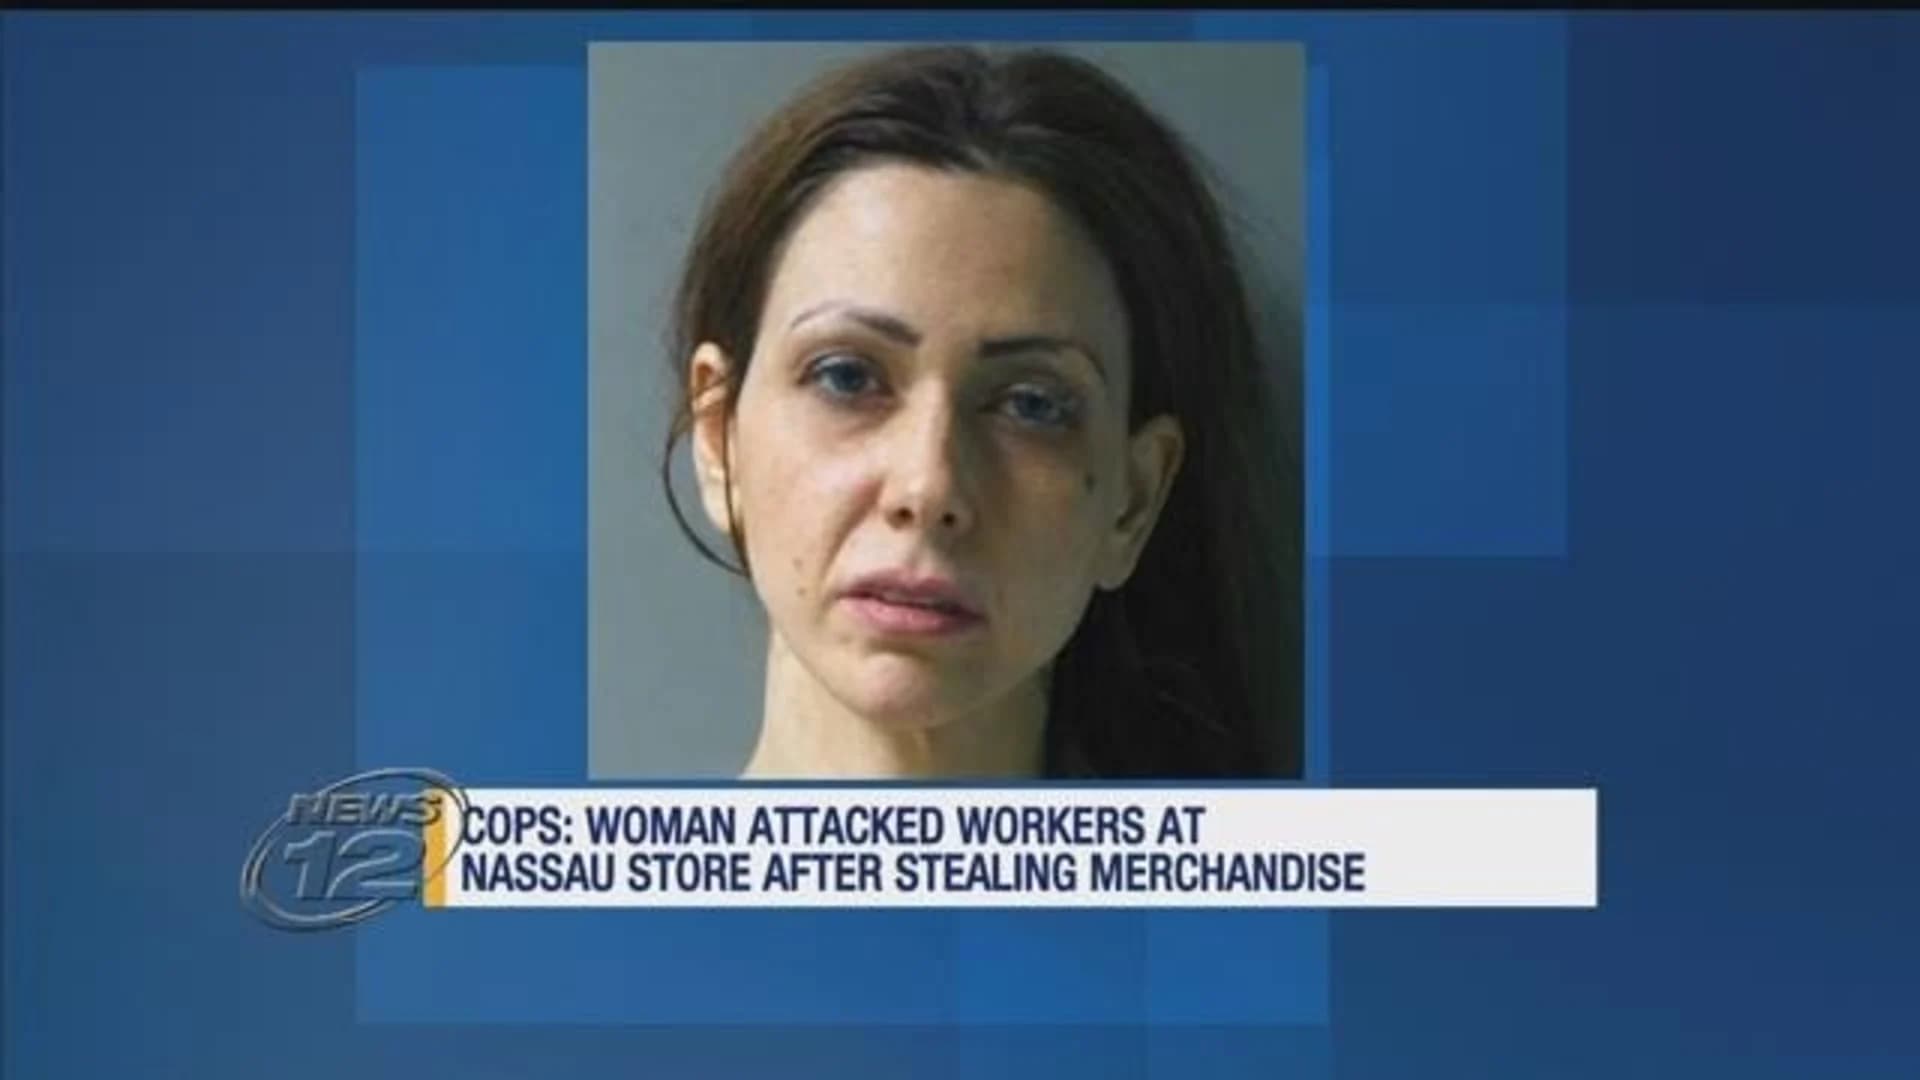 Cops: Woman stole merchandise, attacked workers at Westbury store